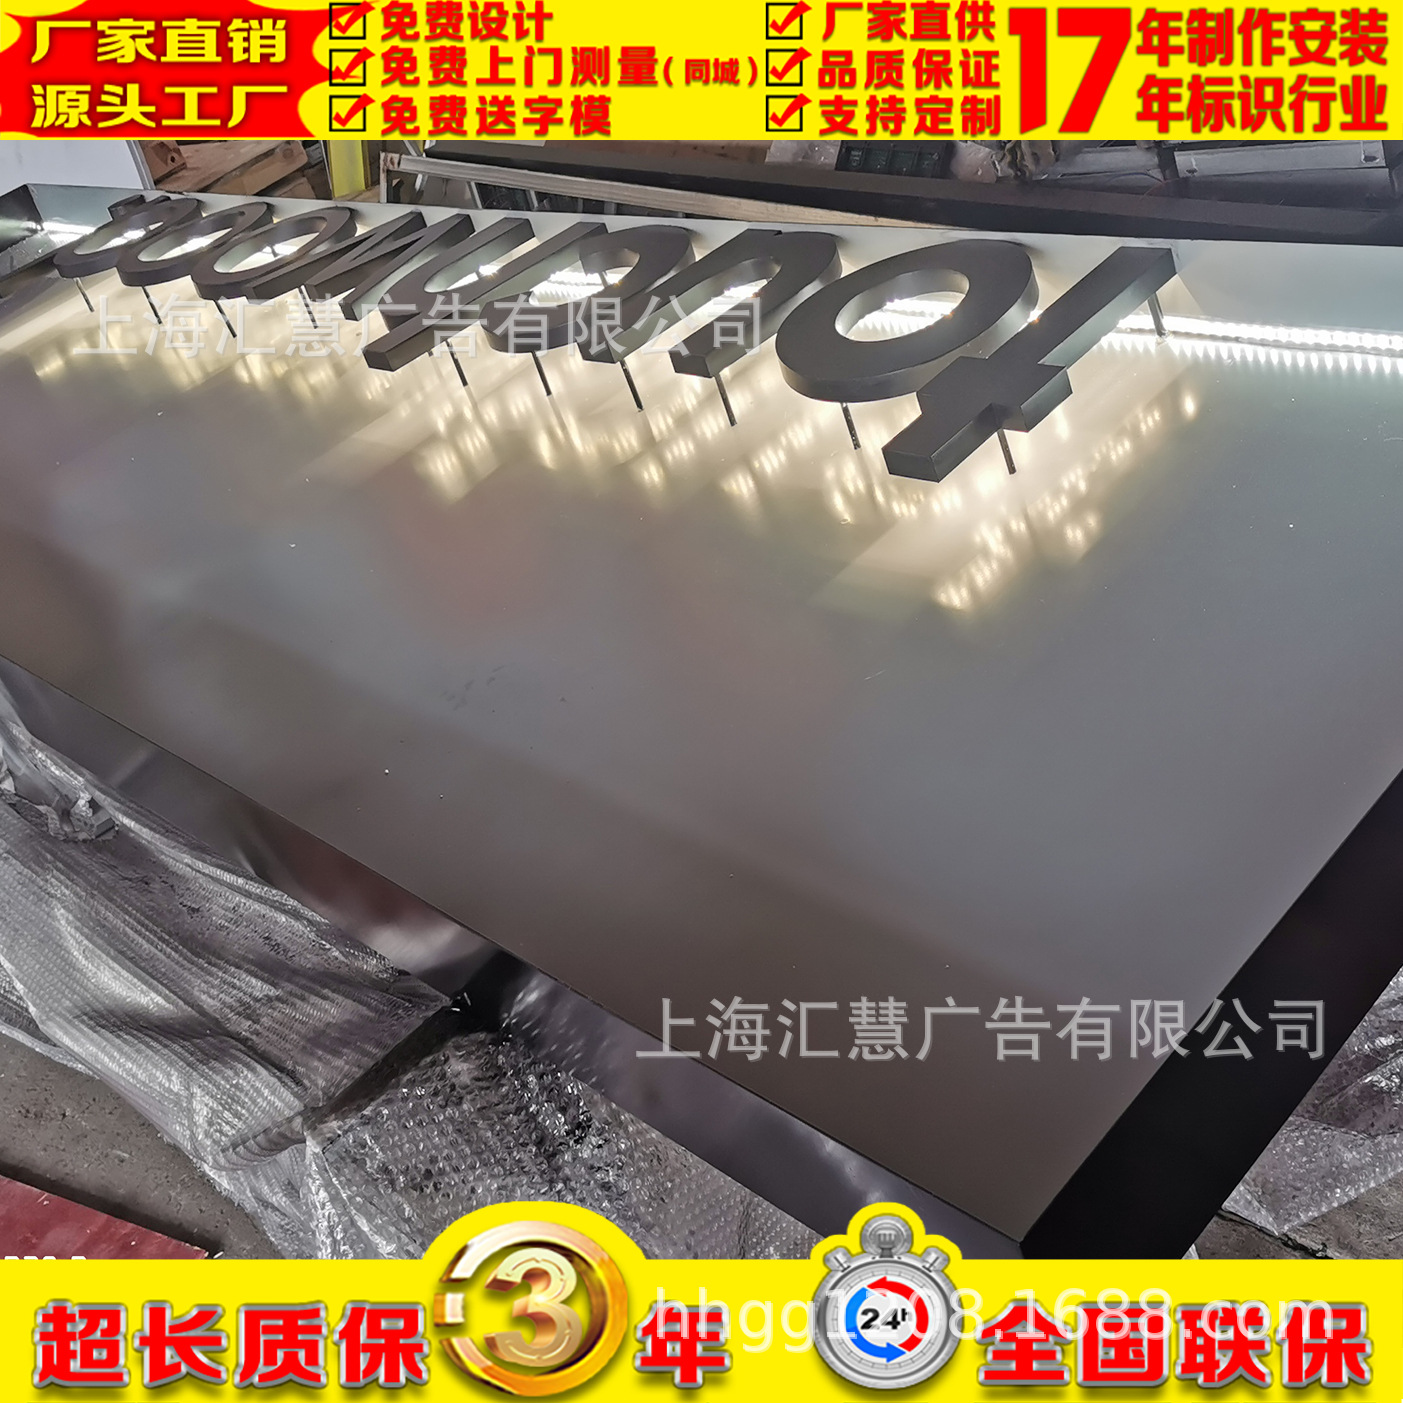 LED Luminous character,Acrylic word,Plastic boxes,Roof billboards